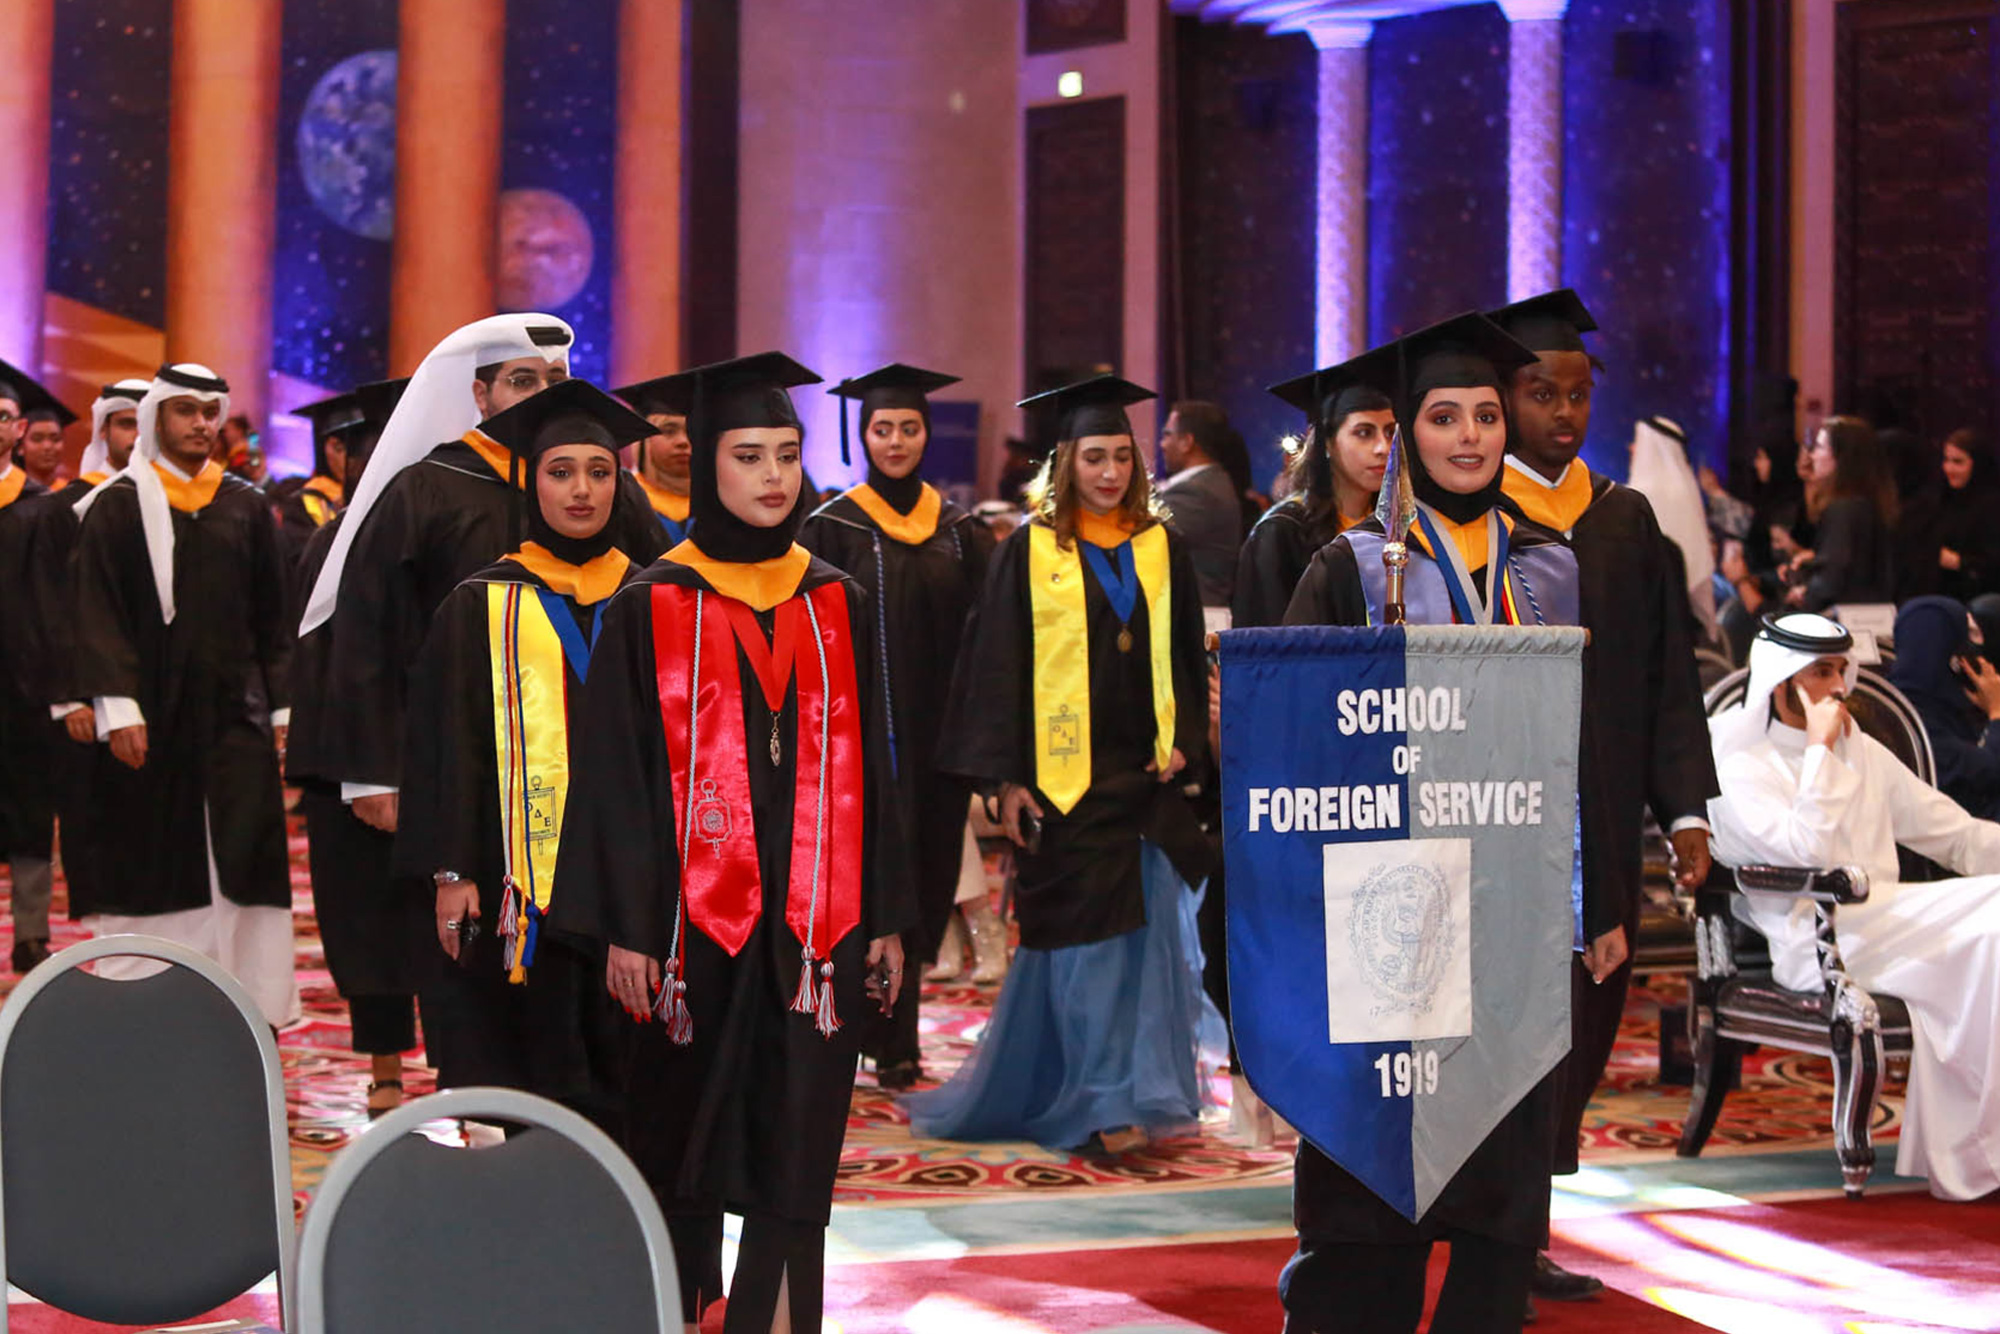 Students taking the ceremonial walk for graduation